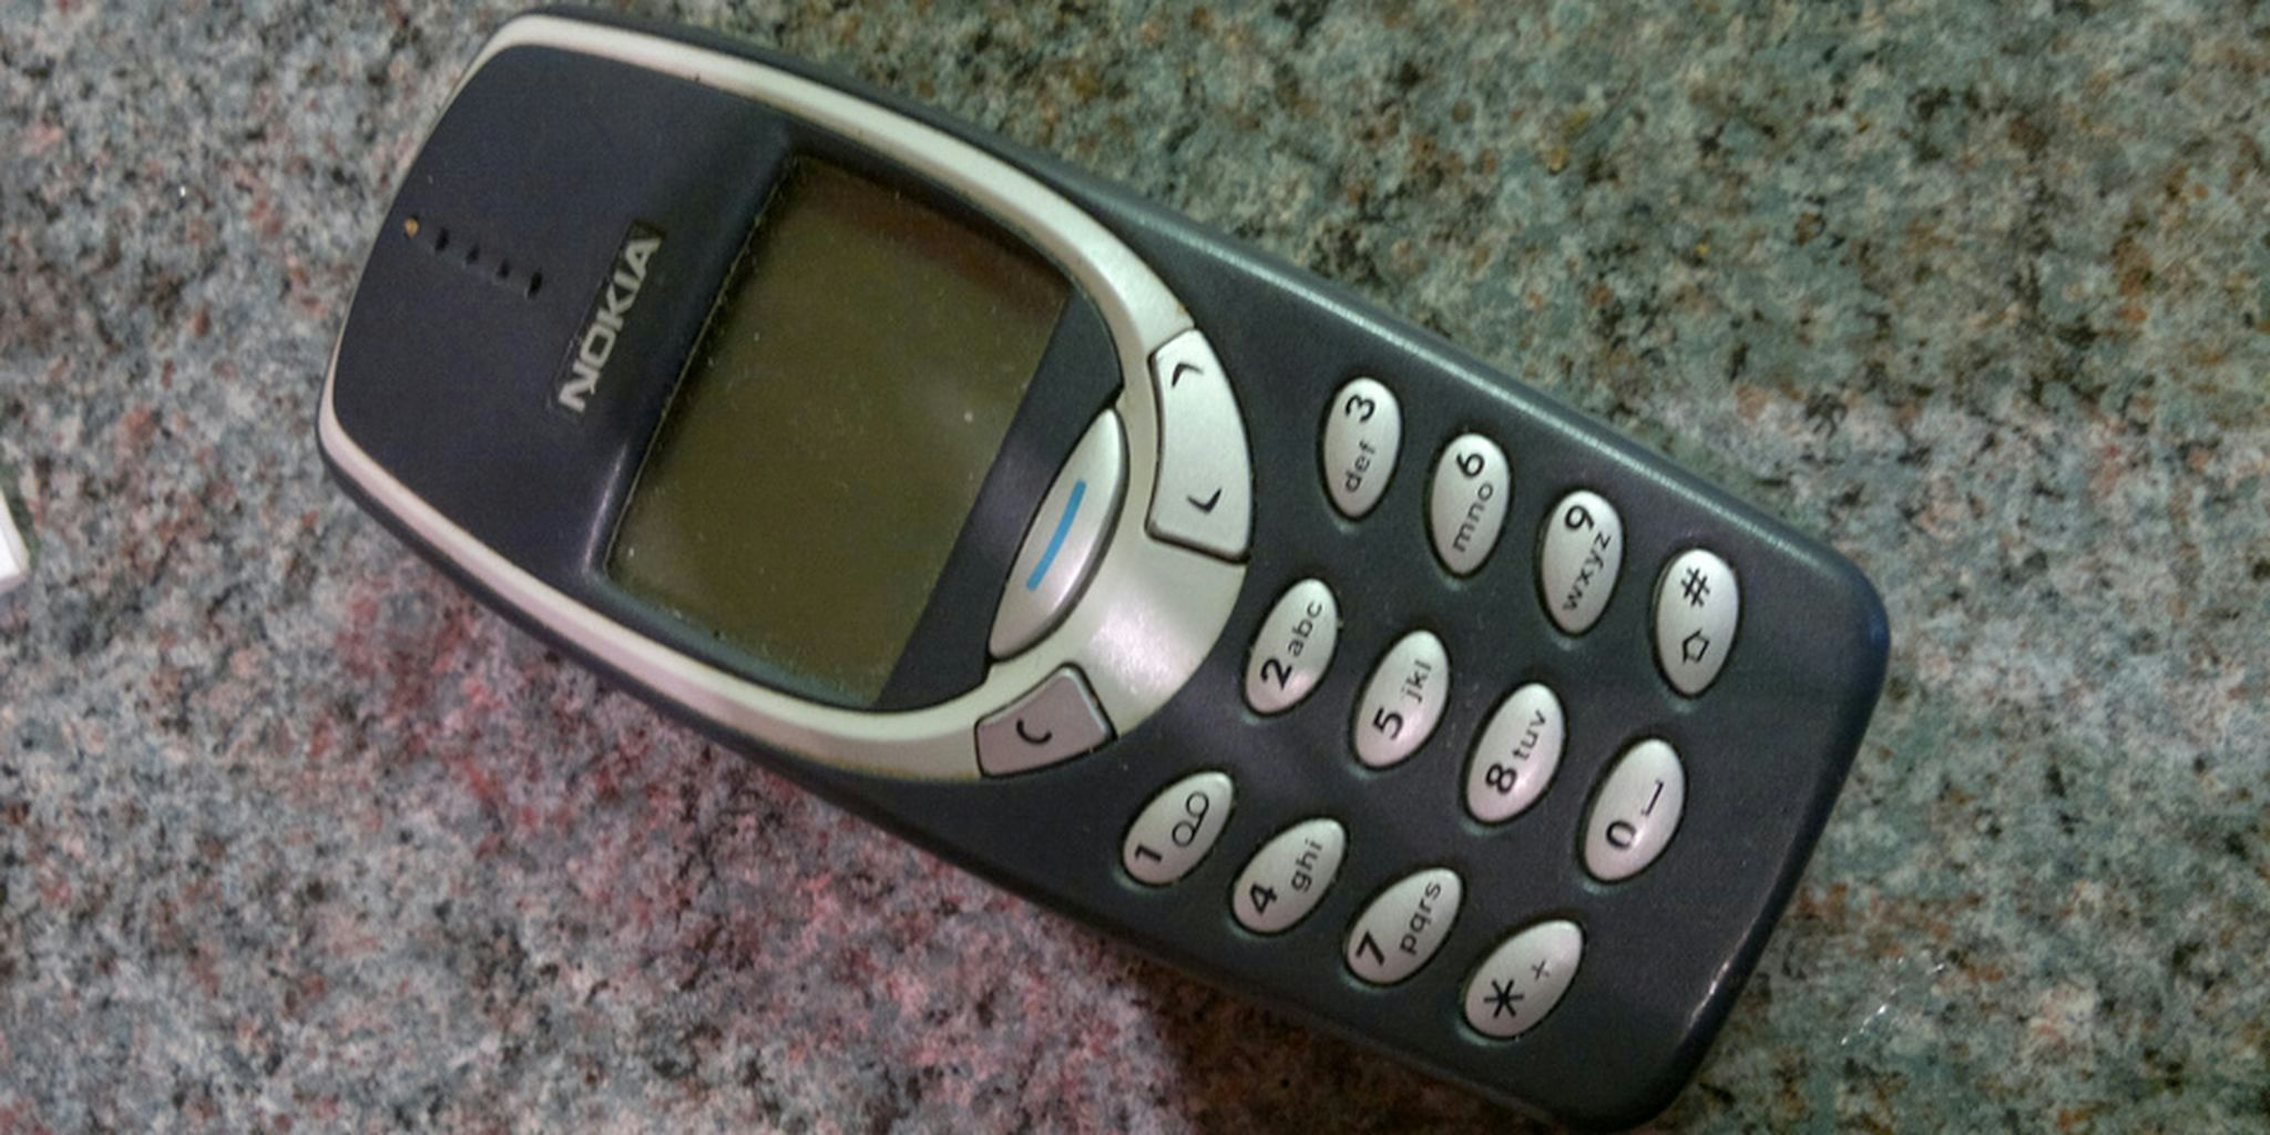 The Nokia Snake slithers its way back on the new 3310 feature phone